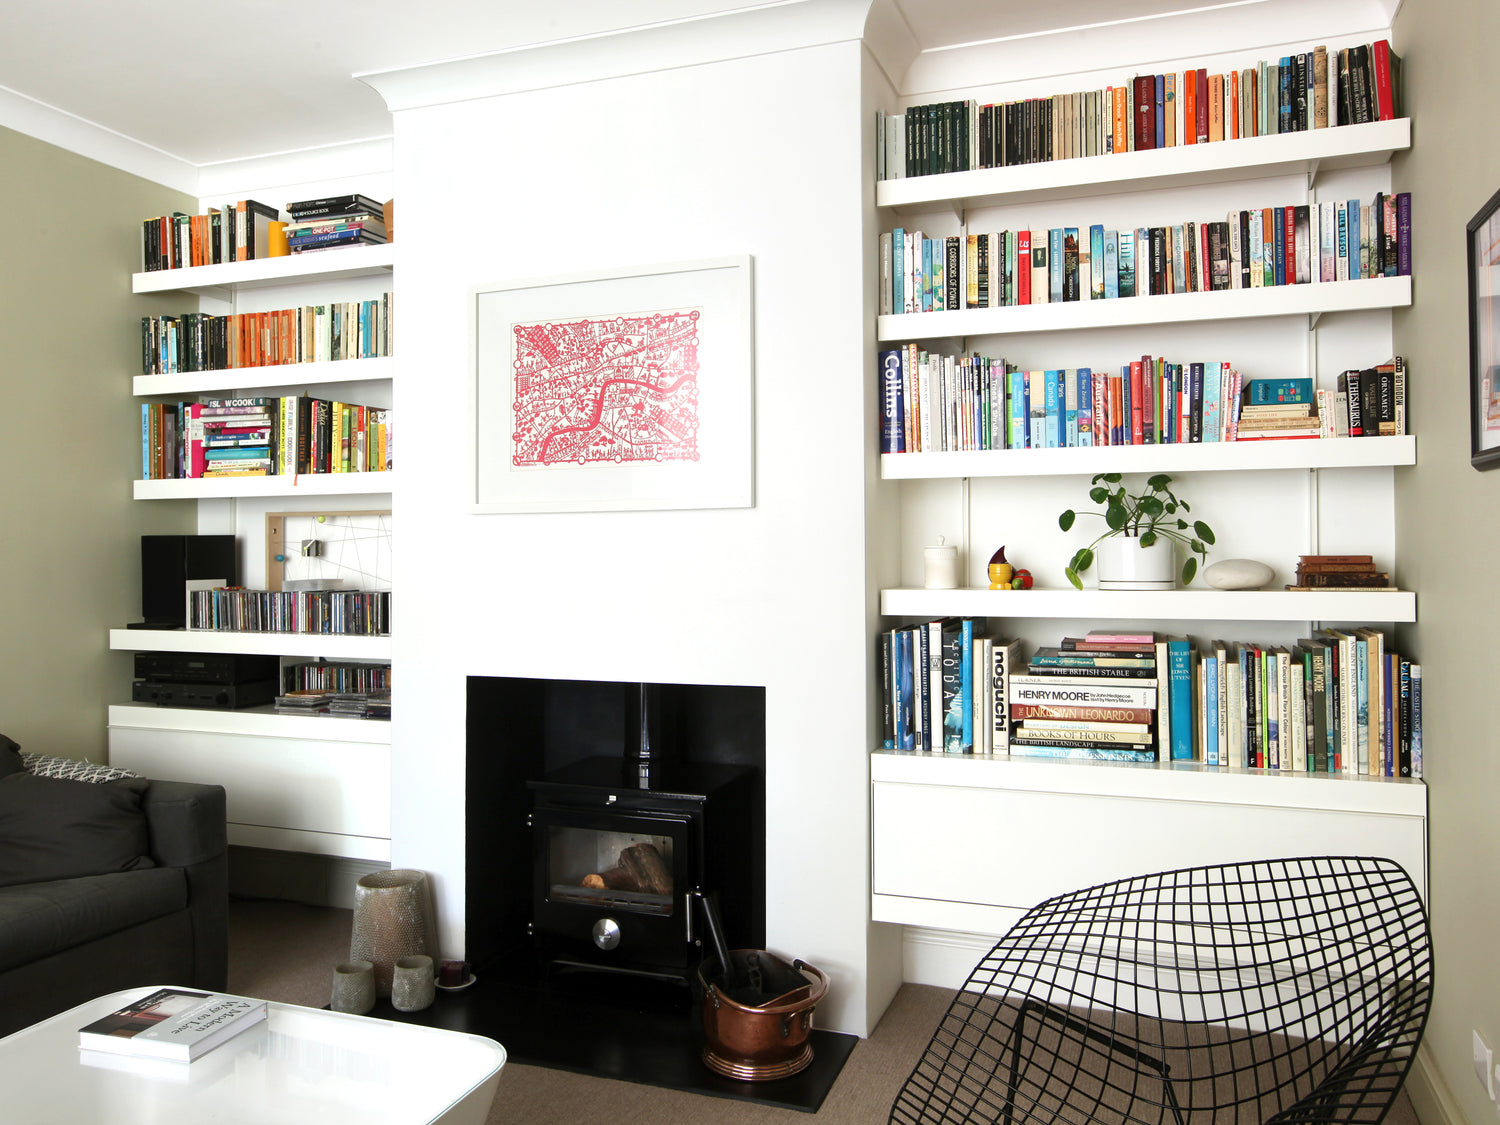 Modern alcove shelving with white wall mounted cabinets and floating shelves